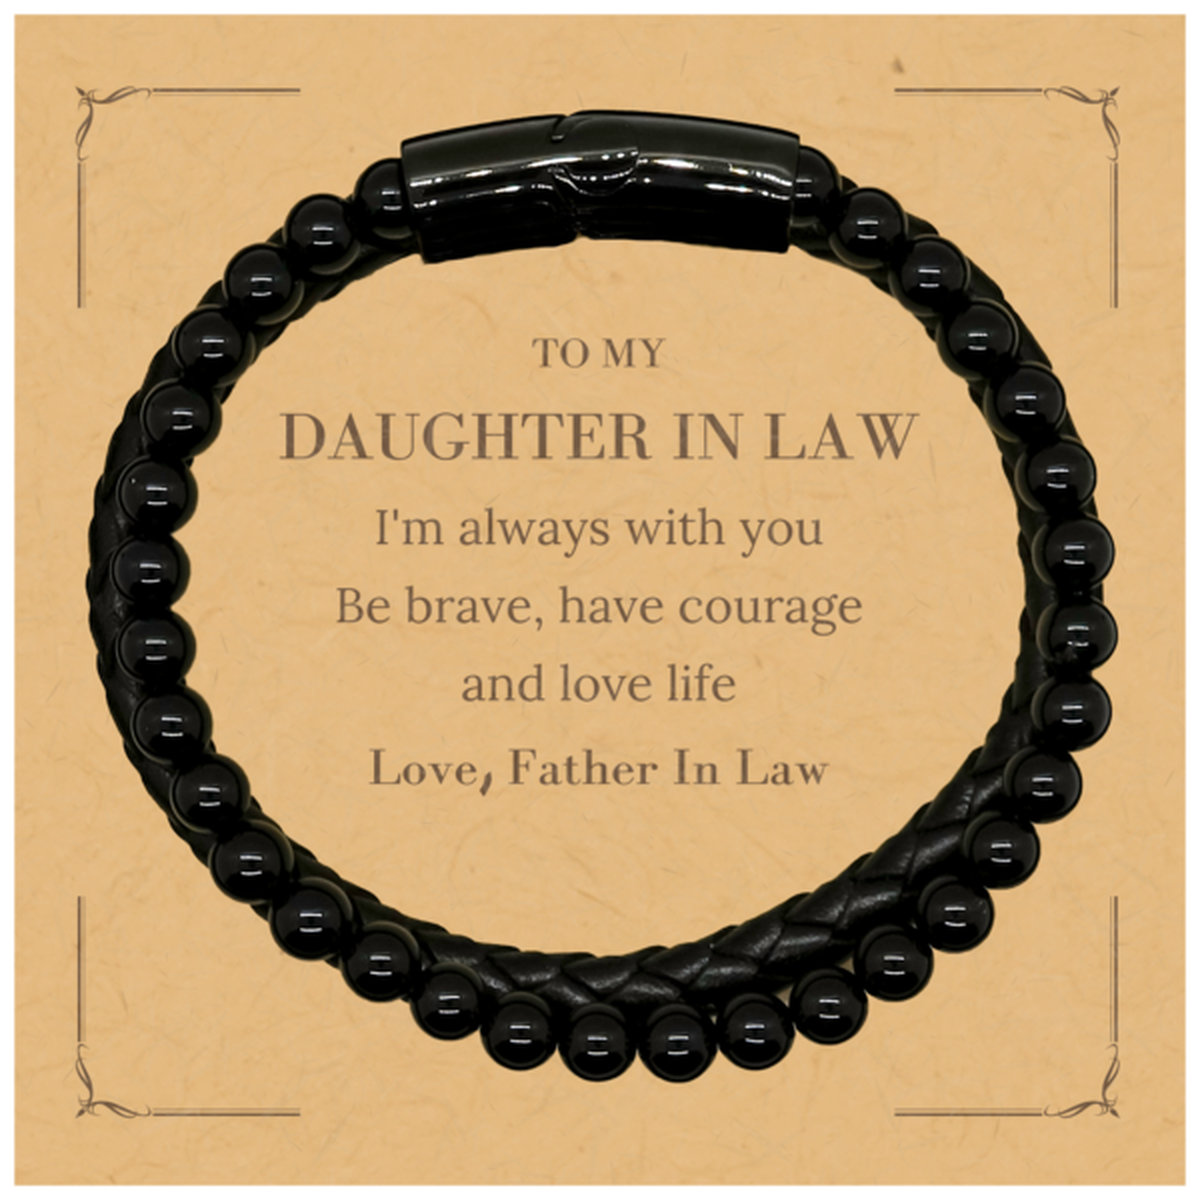 To My Daughter In Law Gifts from Father In Law, Unique Stone Leather Bracelets Inspirational Christmas Birthday Graduation Gifts for Daughter In Law I'm always with you. Be brave, have courage and love life. Love, Father In Law